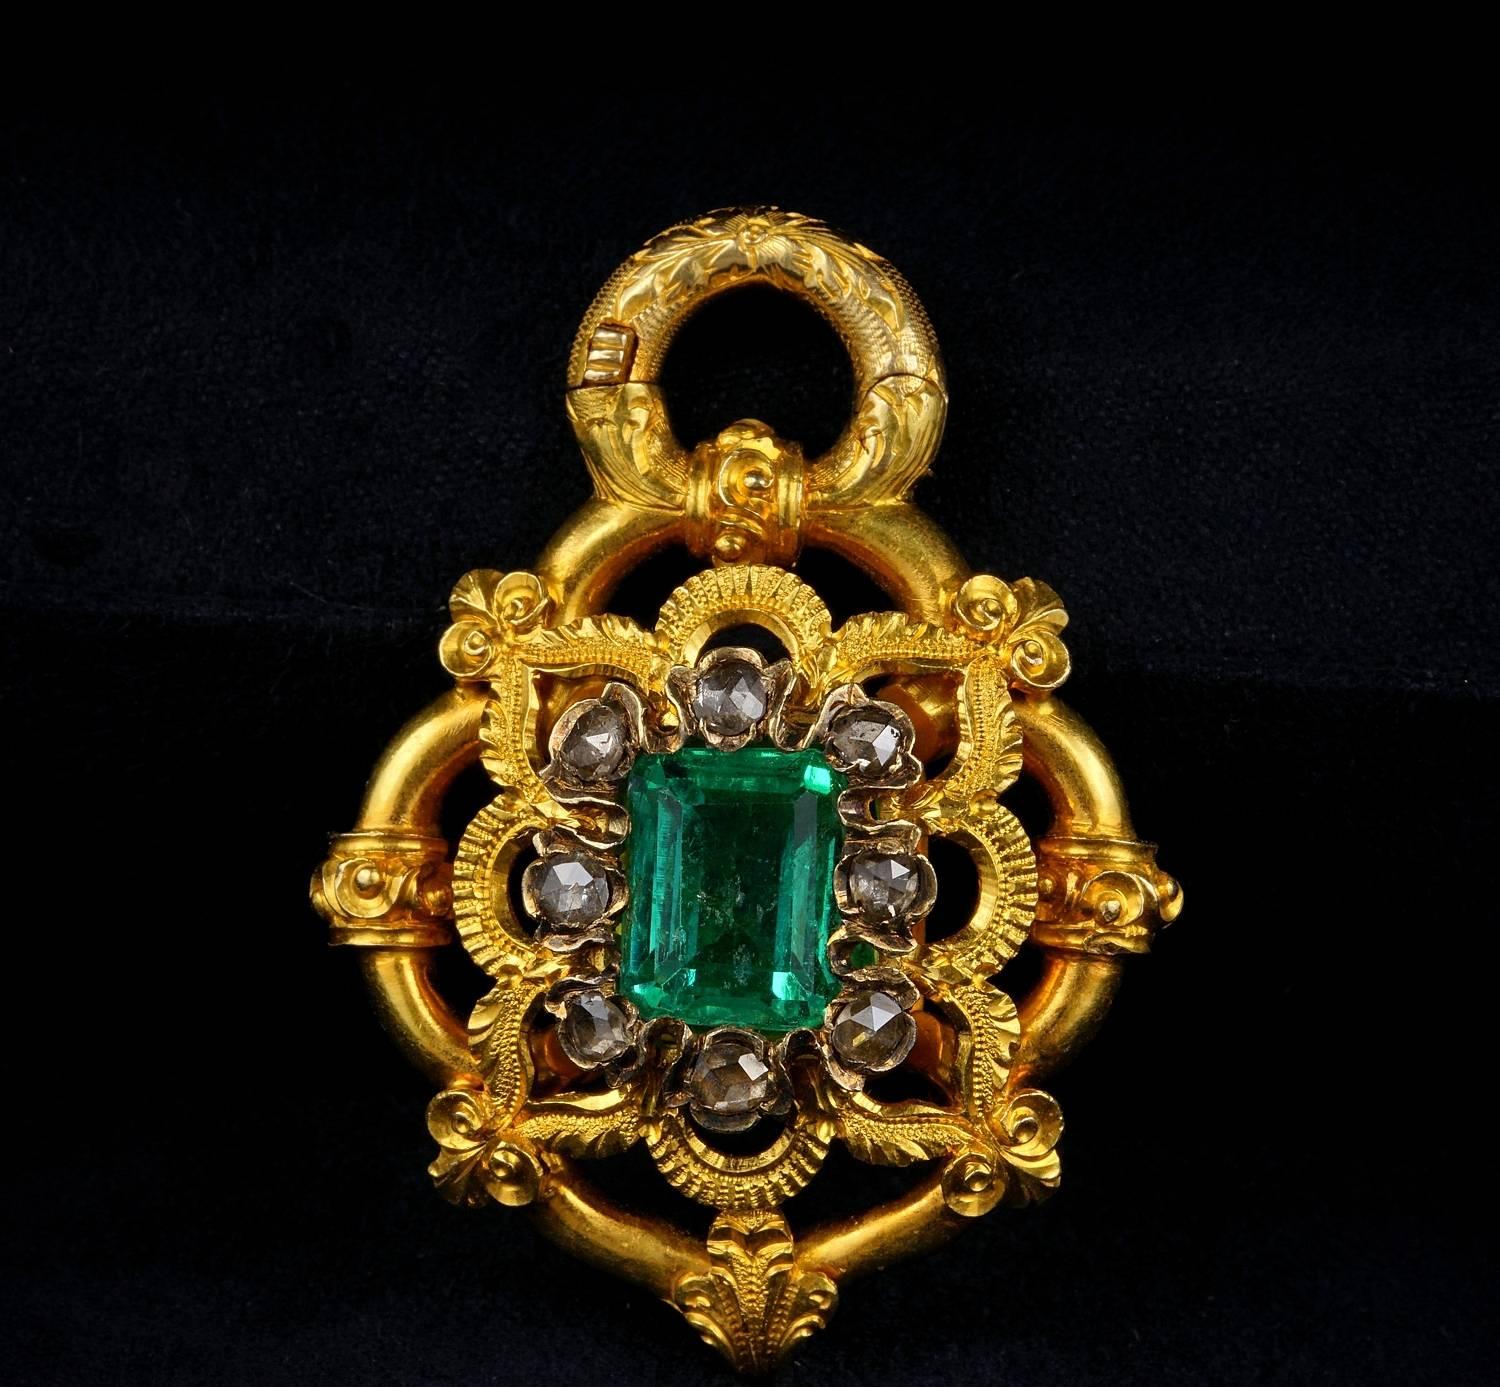 A Magnificent possibly pre - Georgian early pendant with back secret.
For the lovers of early antique jewellery like me I think you can't miss this one.
Fabulous early design all hand hammered in the technique of the time period - testes 19/20 KT